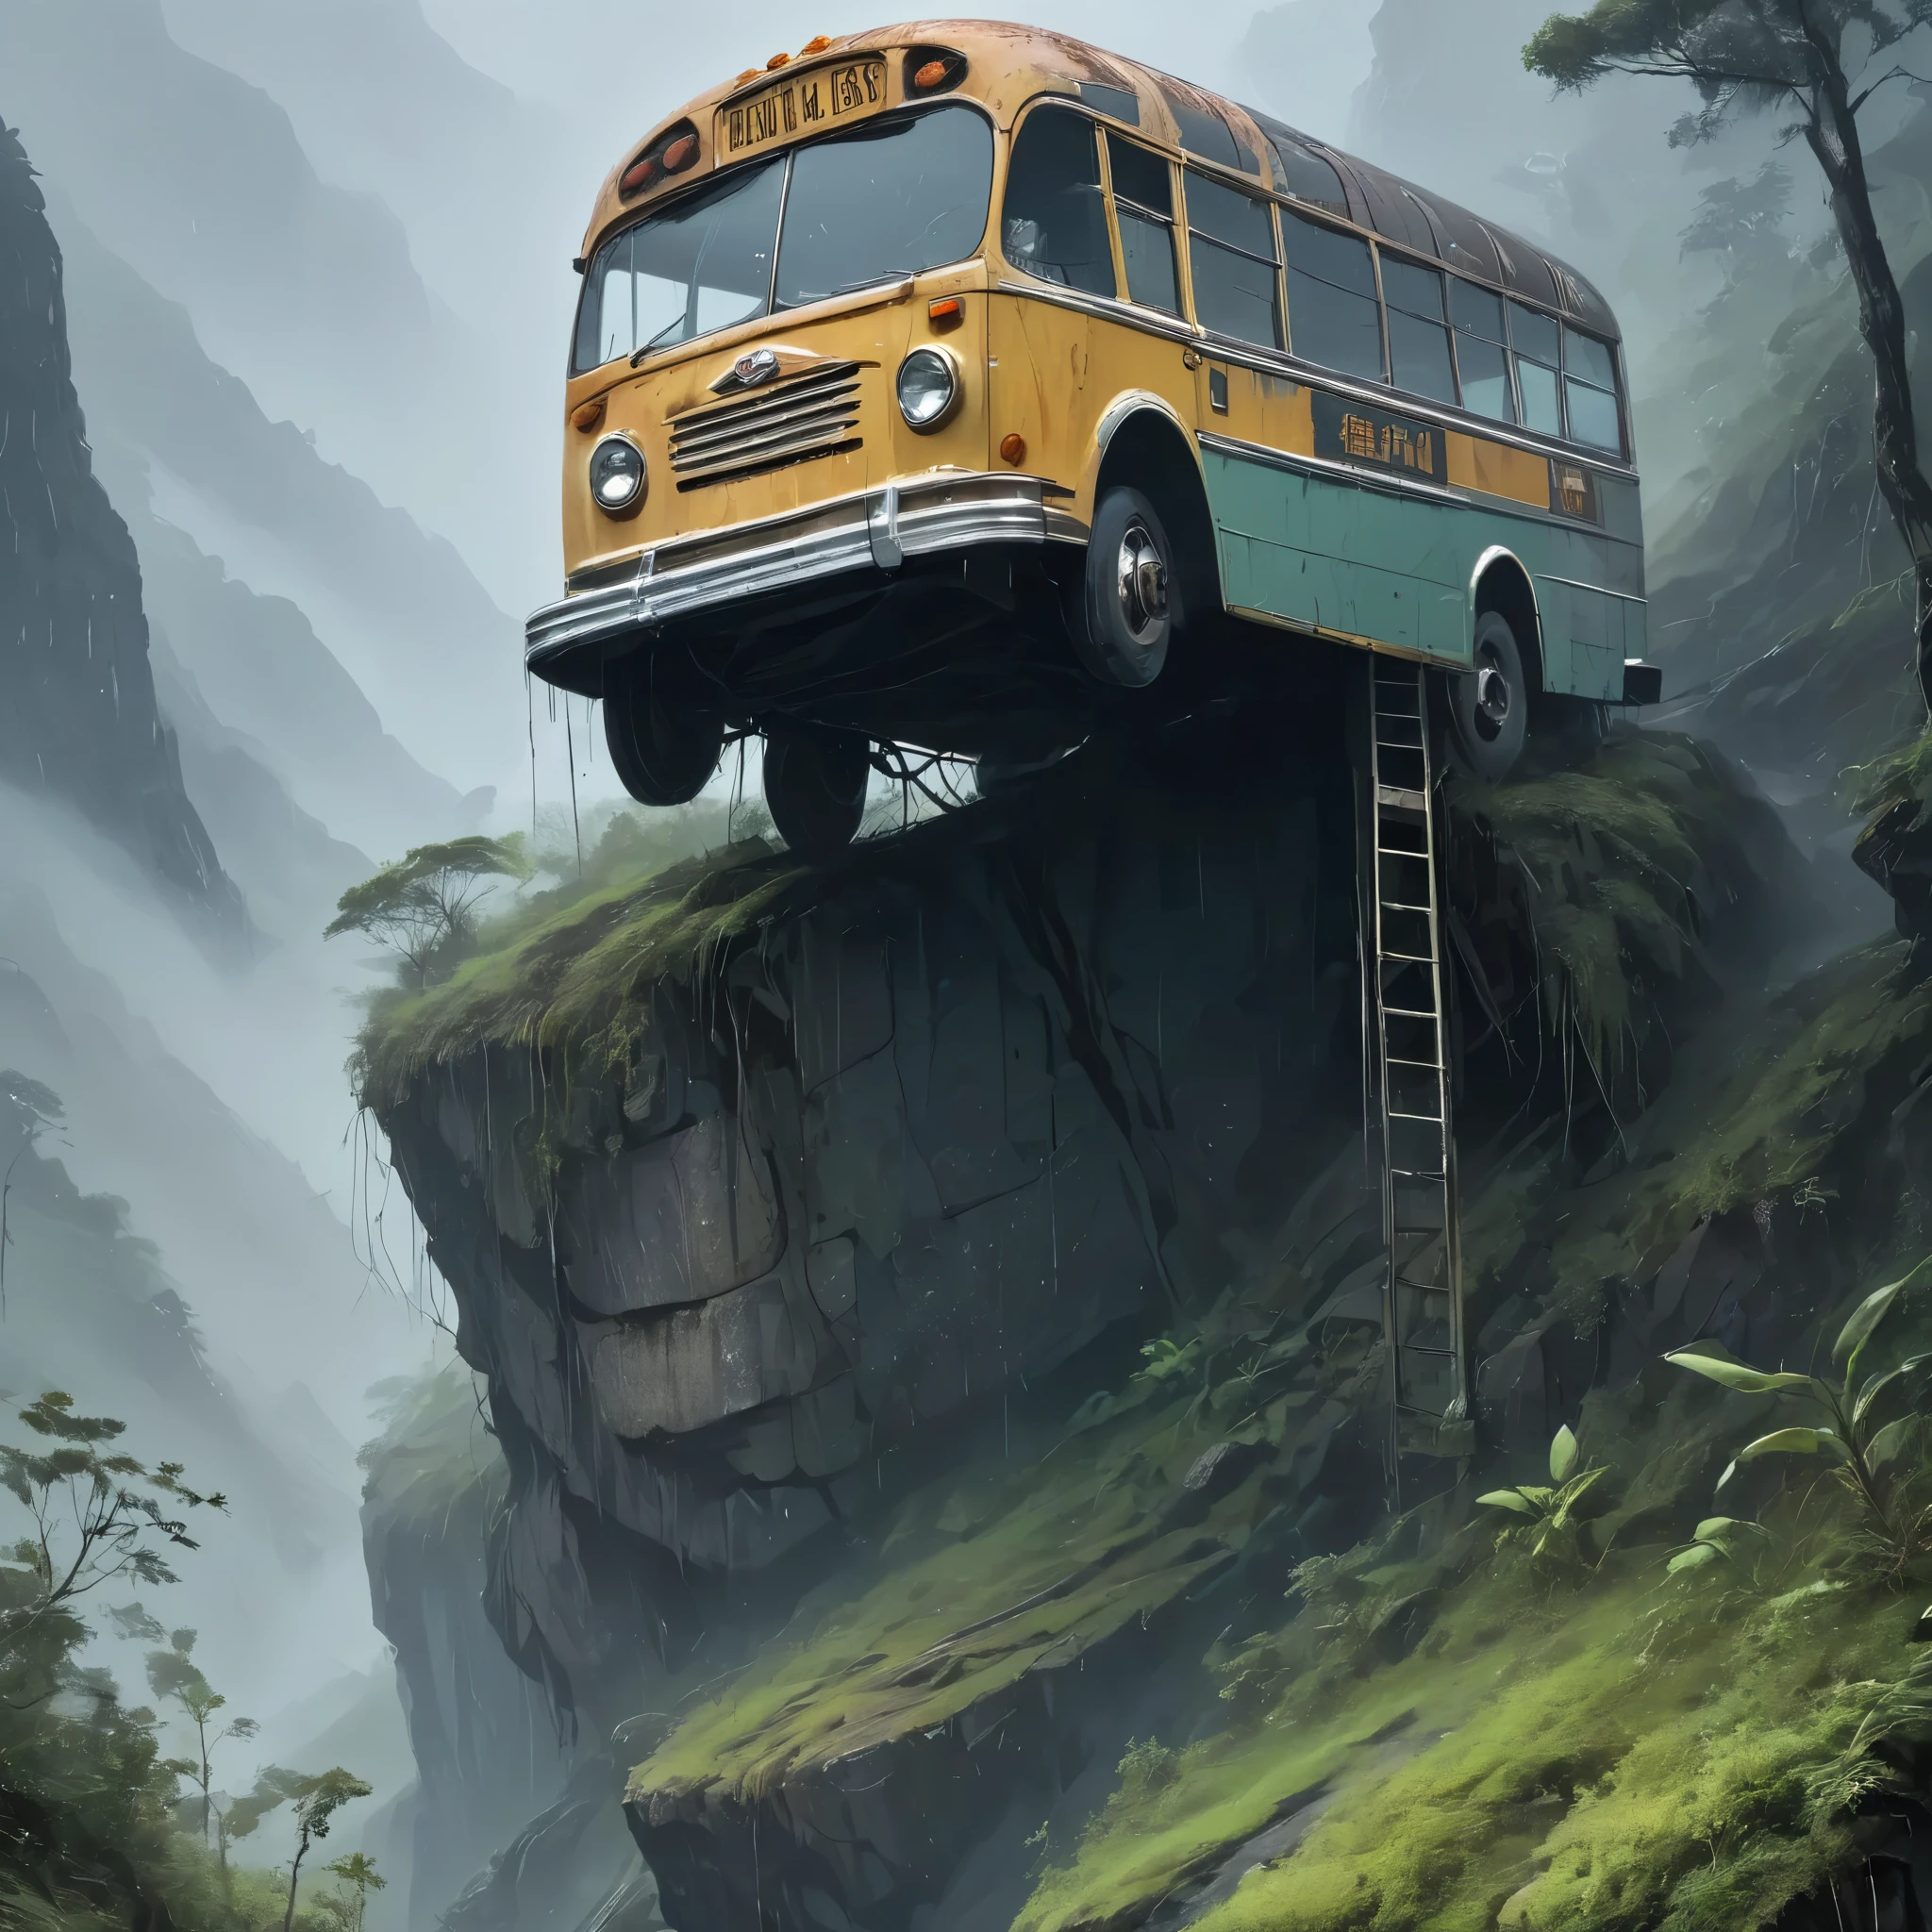 In the midst of a torrential downpour and enveloped in a thick fog the image captures a weathered and decrepit bus precariously perched atop a rugged mountain serving as an unlikely bridge connecting two separate worlds